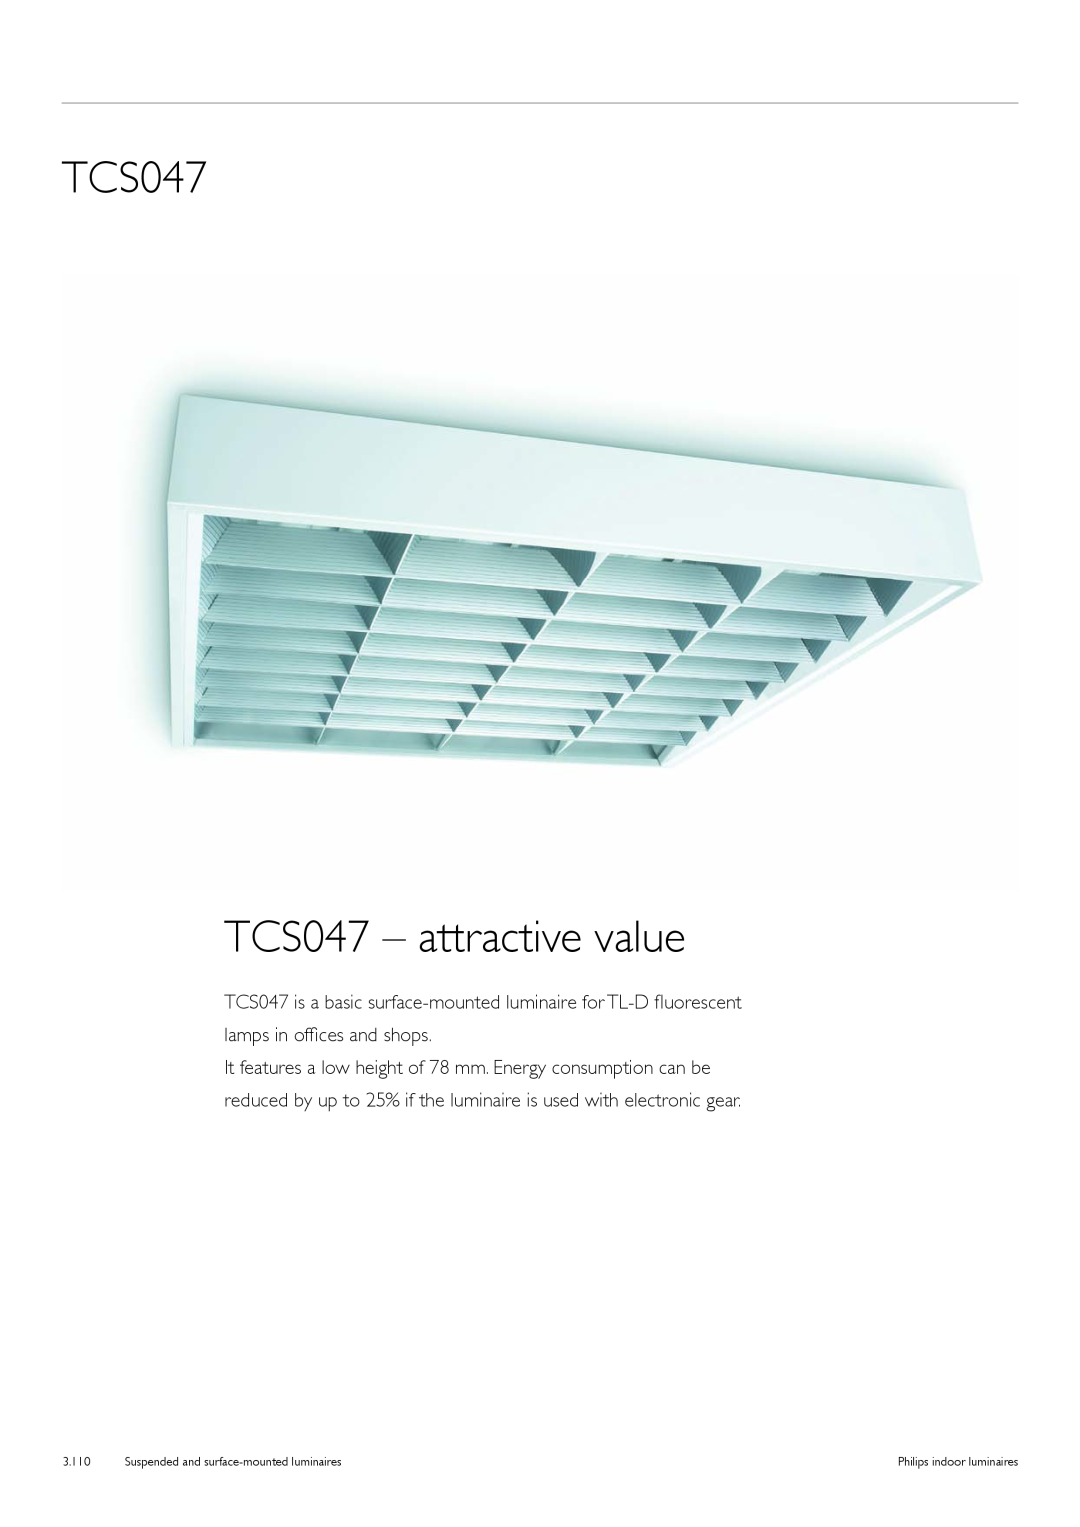 Philips TCS125 TCS047 TCS047 – attractive value, Suspended and surface-mountedluminaires, 3.110, Philips indoor luminaires 